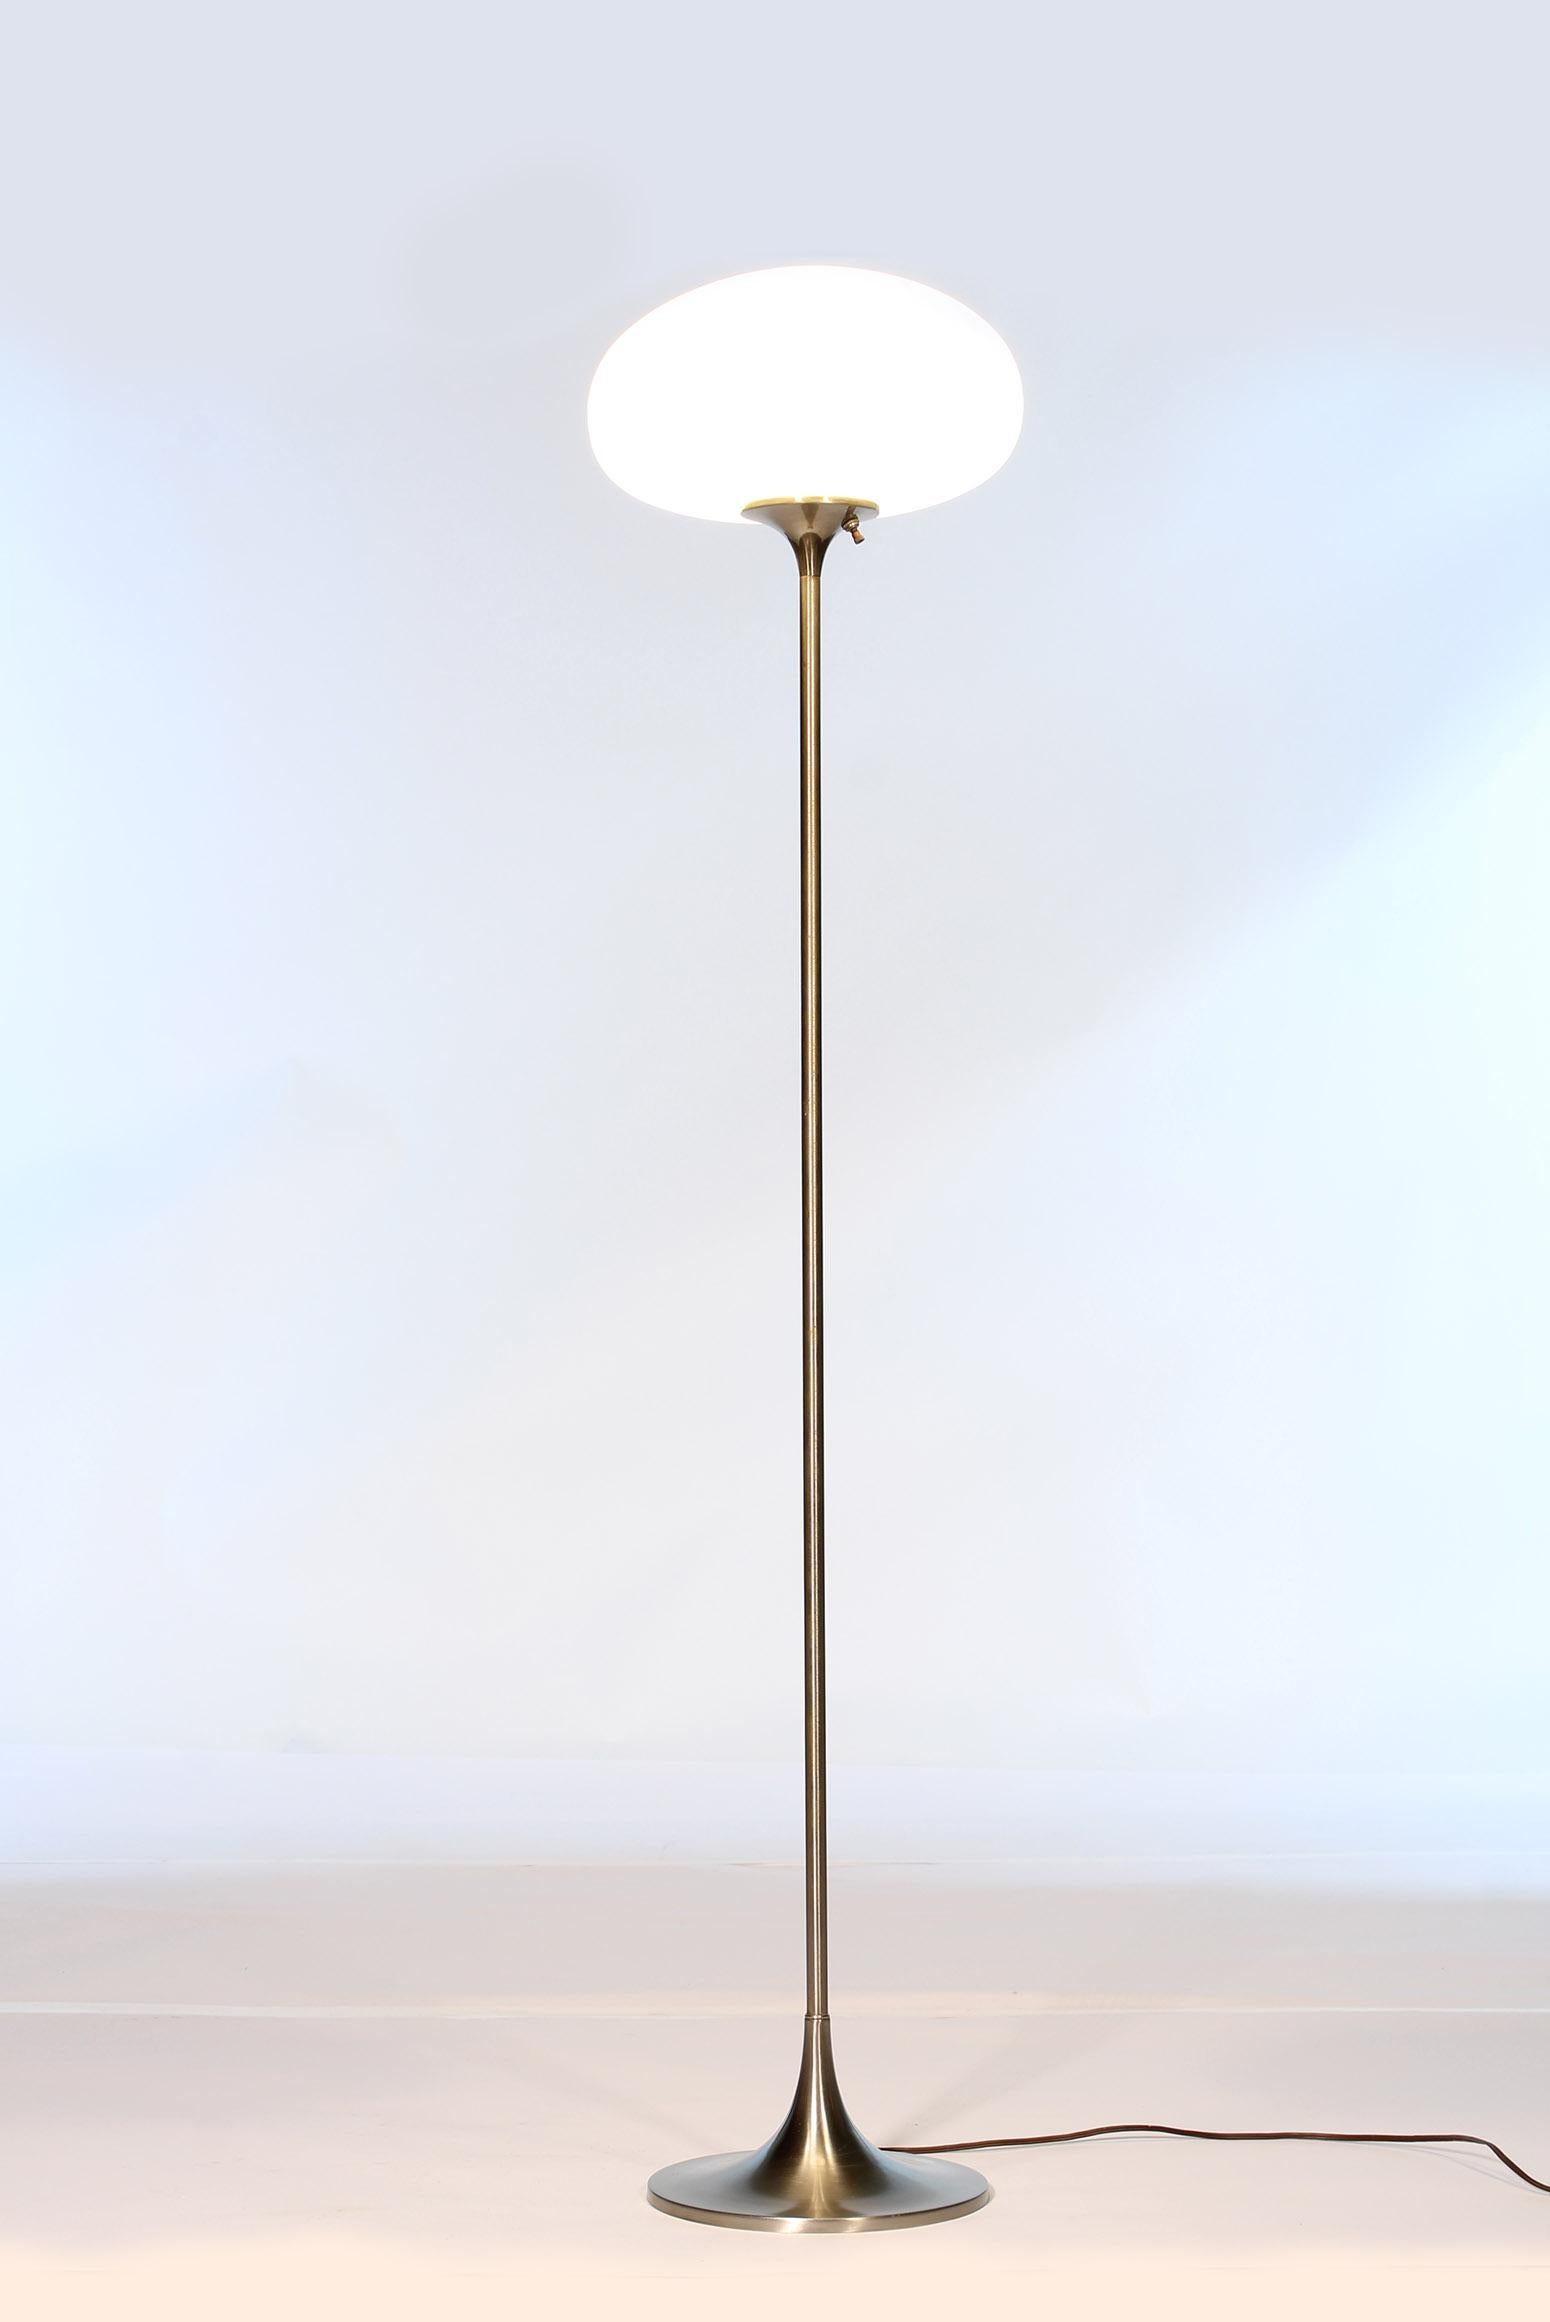 Authentic 1970s Laurel floor lamp with frosted glass mushroom globe and nickel finish. A few scratches and imperfections here and there and some pitting on base. Measures 56